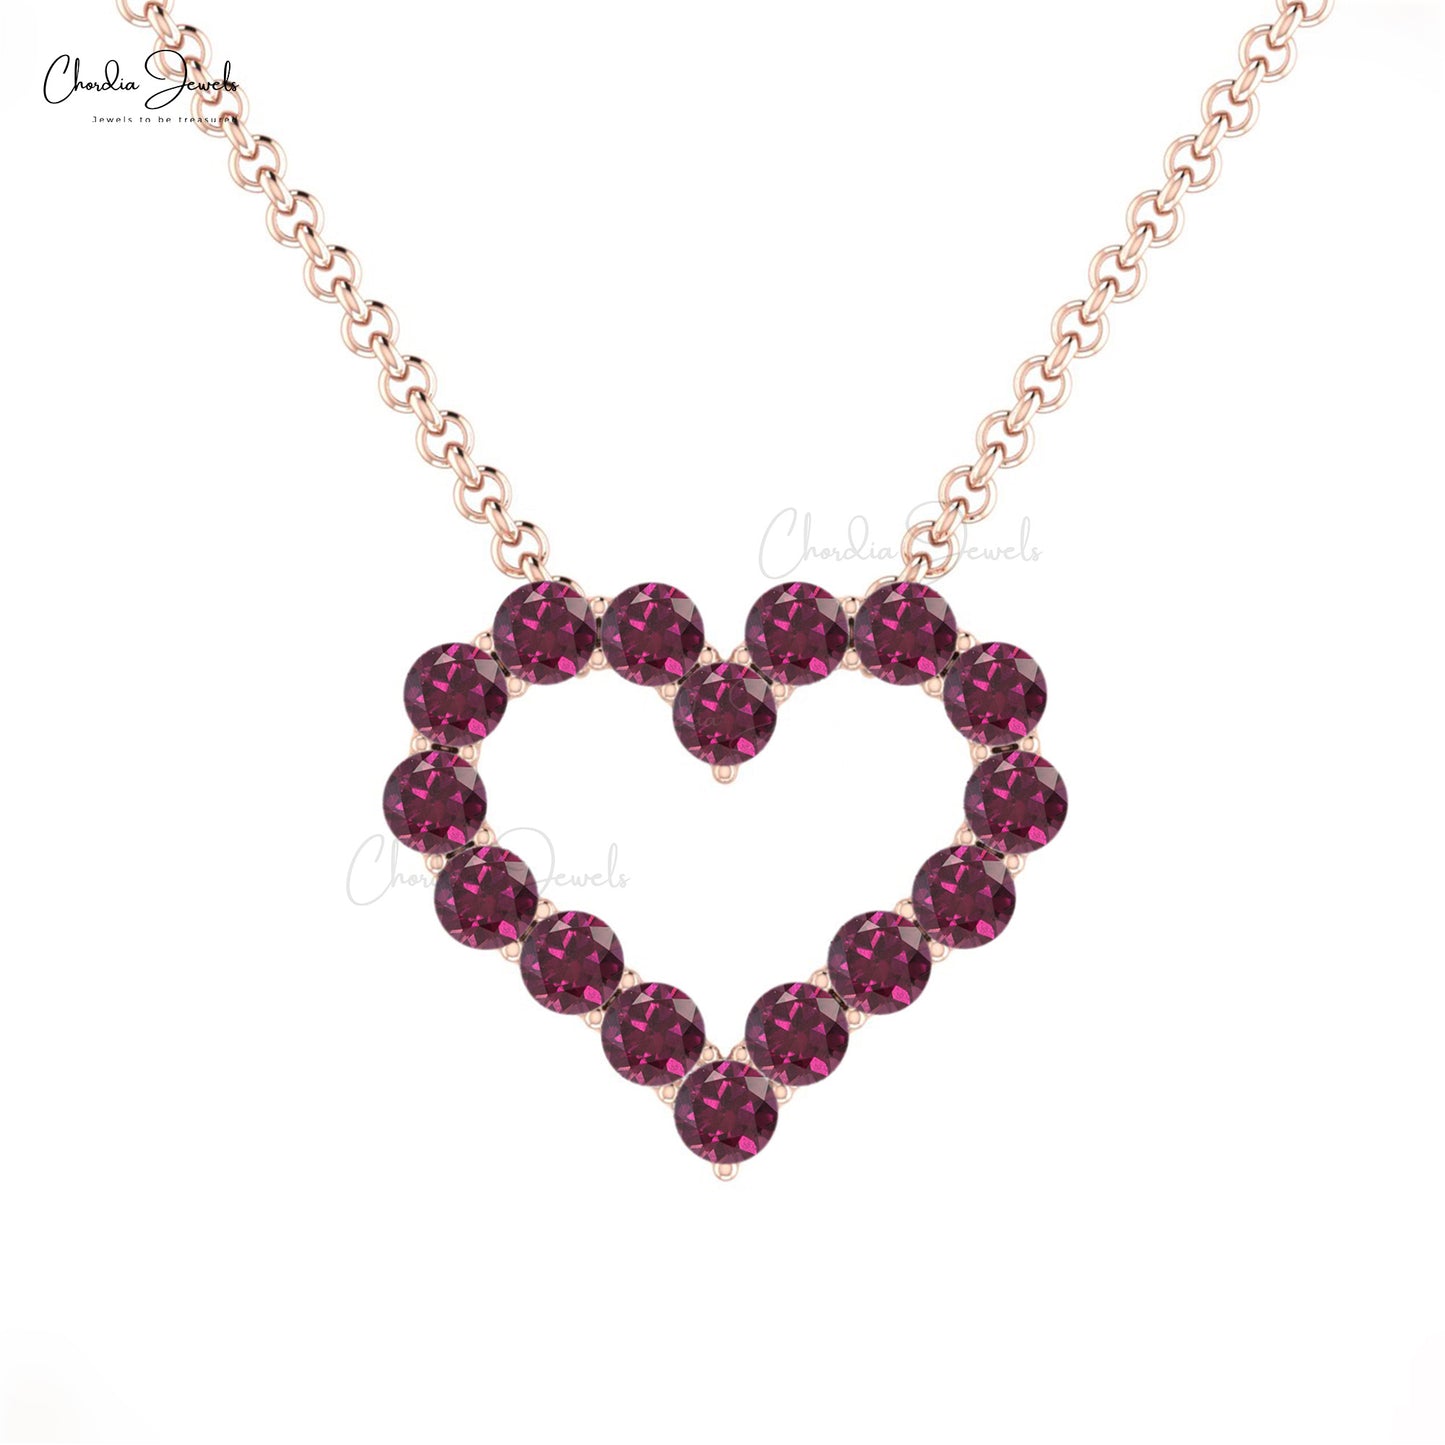 Load image into Gallery viewer, Latest Design January Birthstone Authentic Rhodolite Garnet Open Heart Necklace Pendant 14k Real Gold Necklace Wedding Gift
